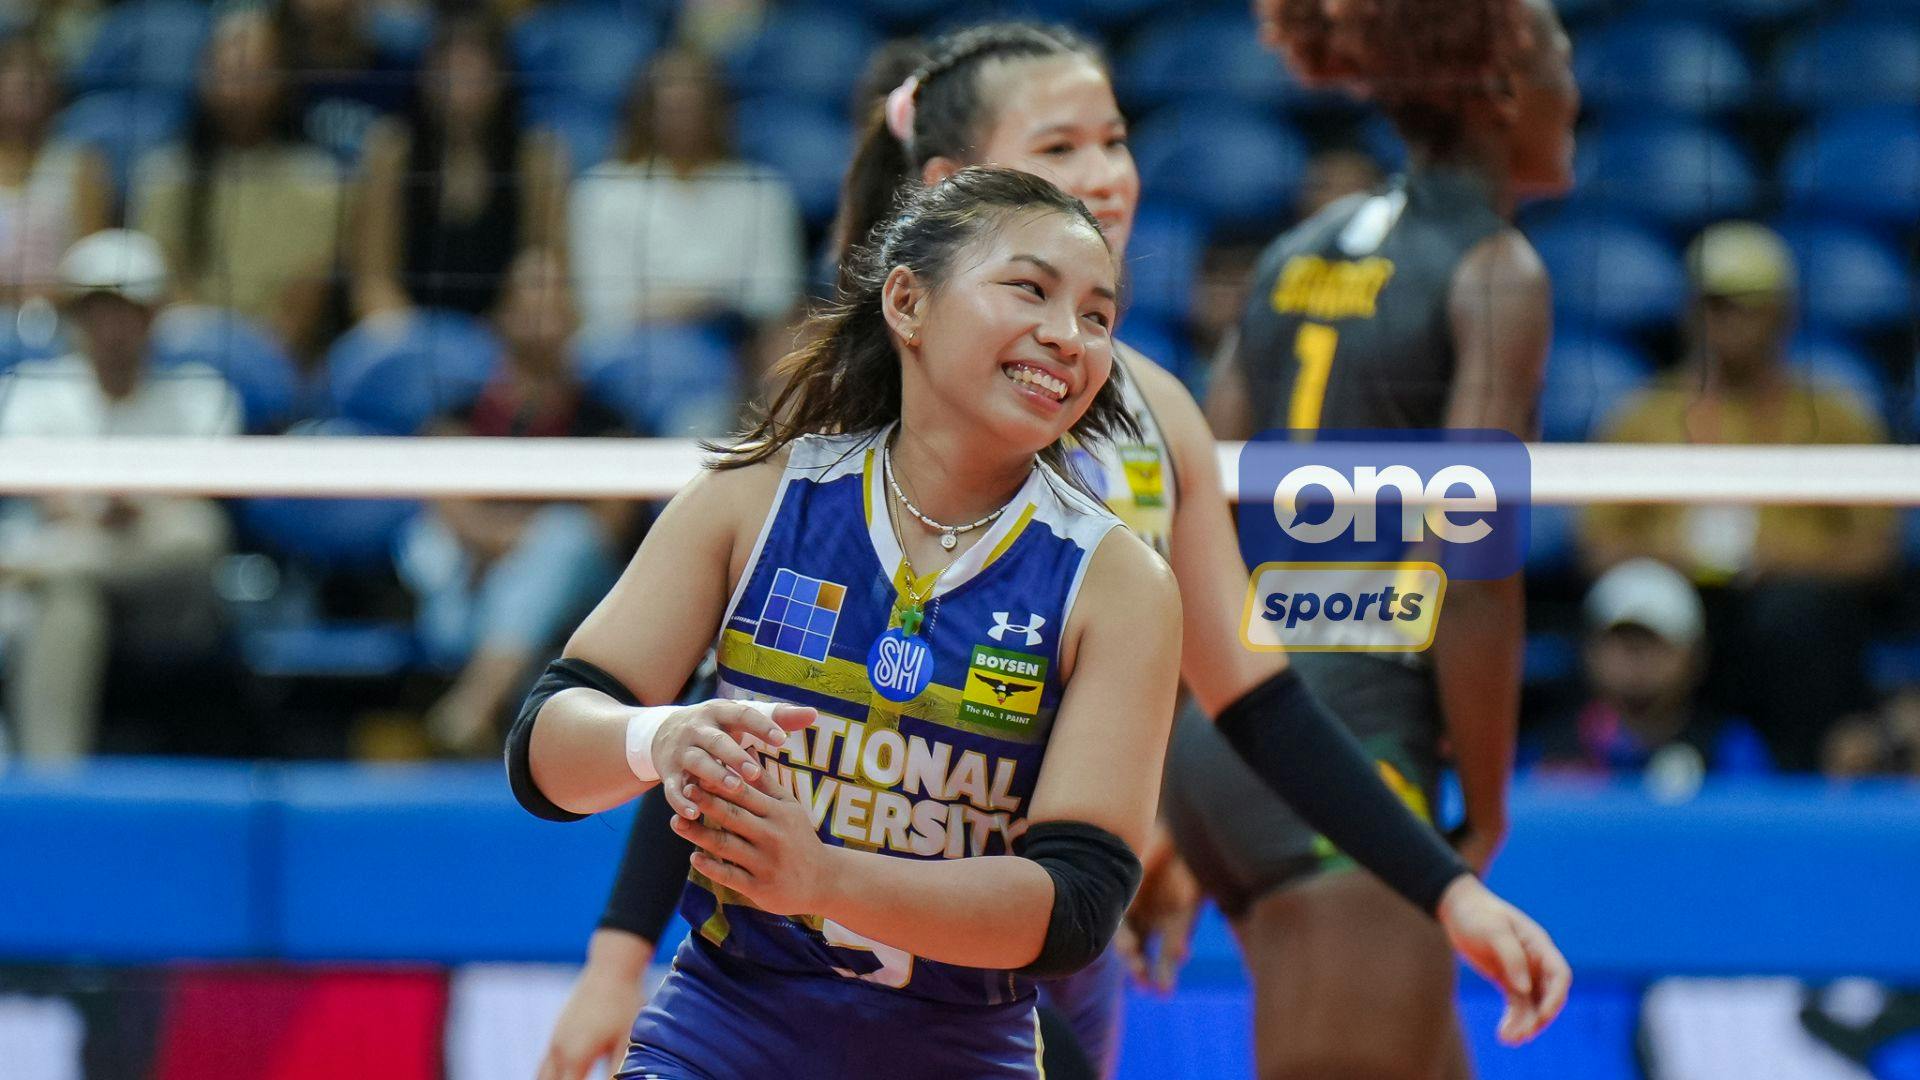 UAAP: Shaira Jardio hopes to bring positive mindset, consistency for NU come Final Four